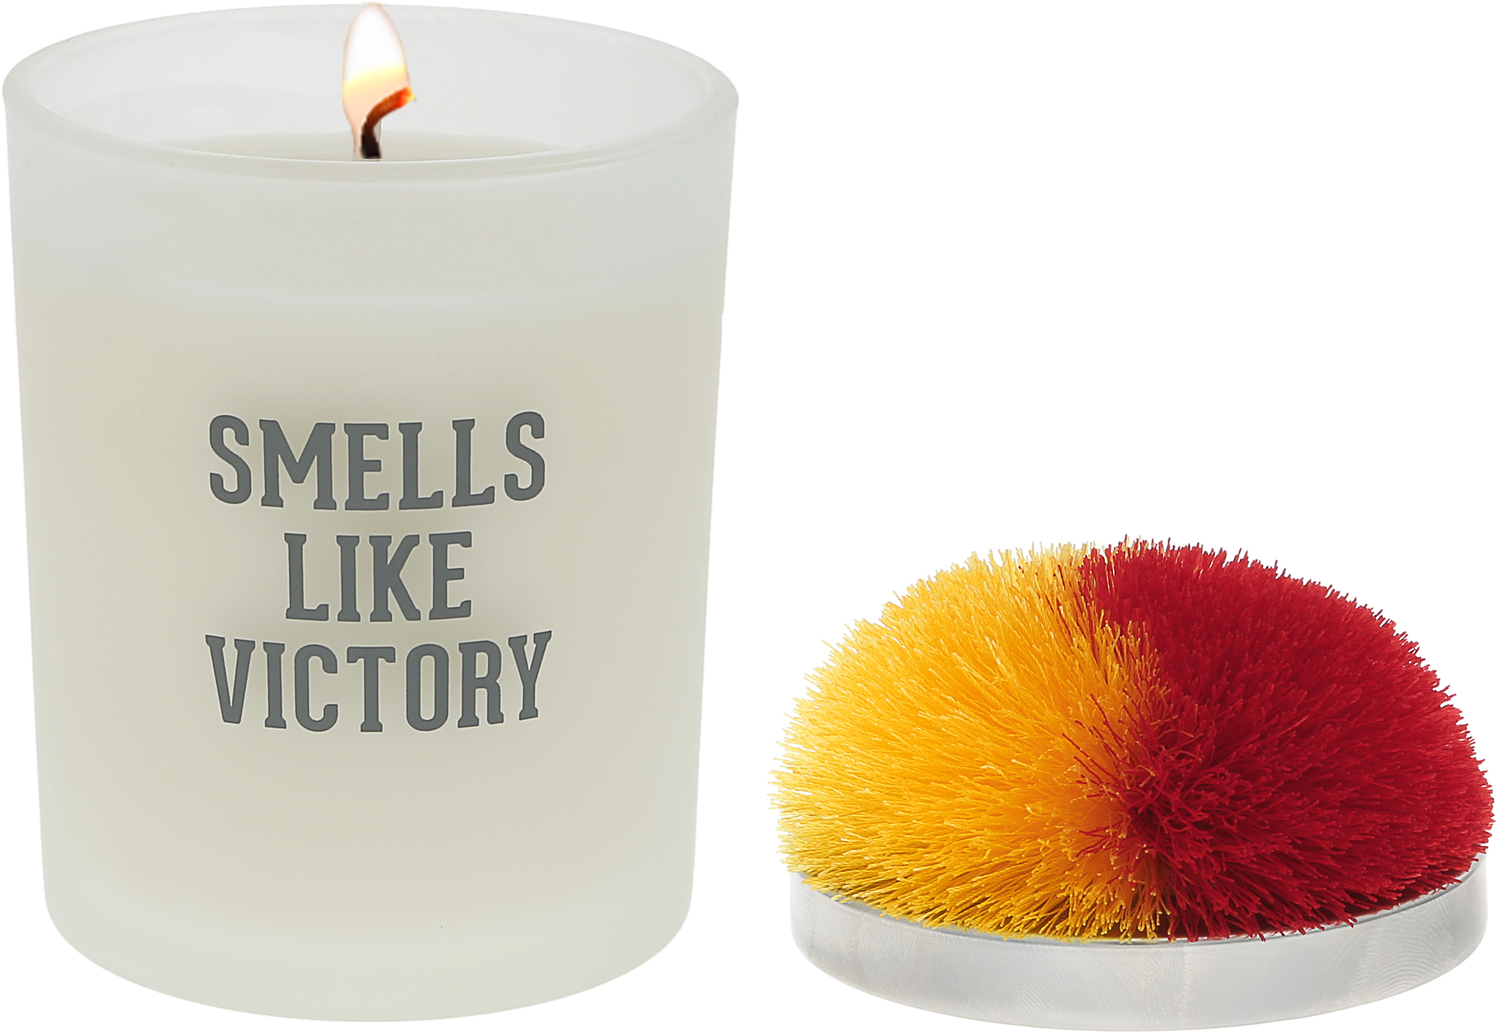 Victory - Red & Yellow by Repre-Scent - Victory - Red & Yellow - 5.5 oz - 100% Soy Wax Candle with Pom Pom Lid
Scent: Tranquility